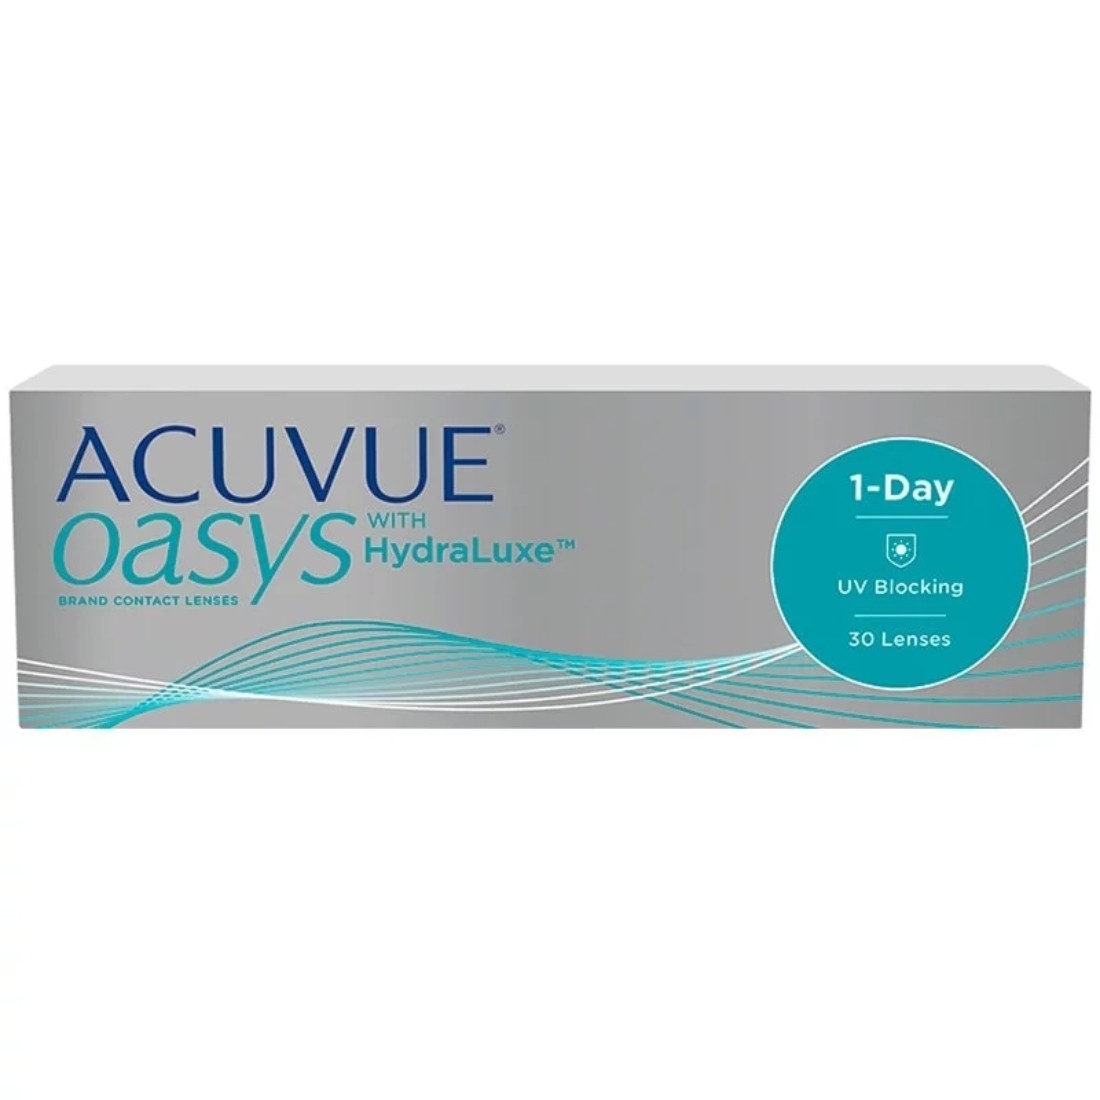 Acuvue_Oasys_1-Day_com_Hydraluxe.jpg